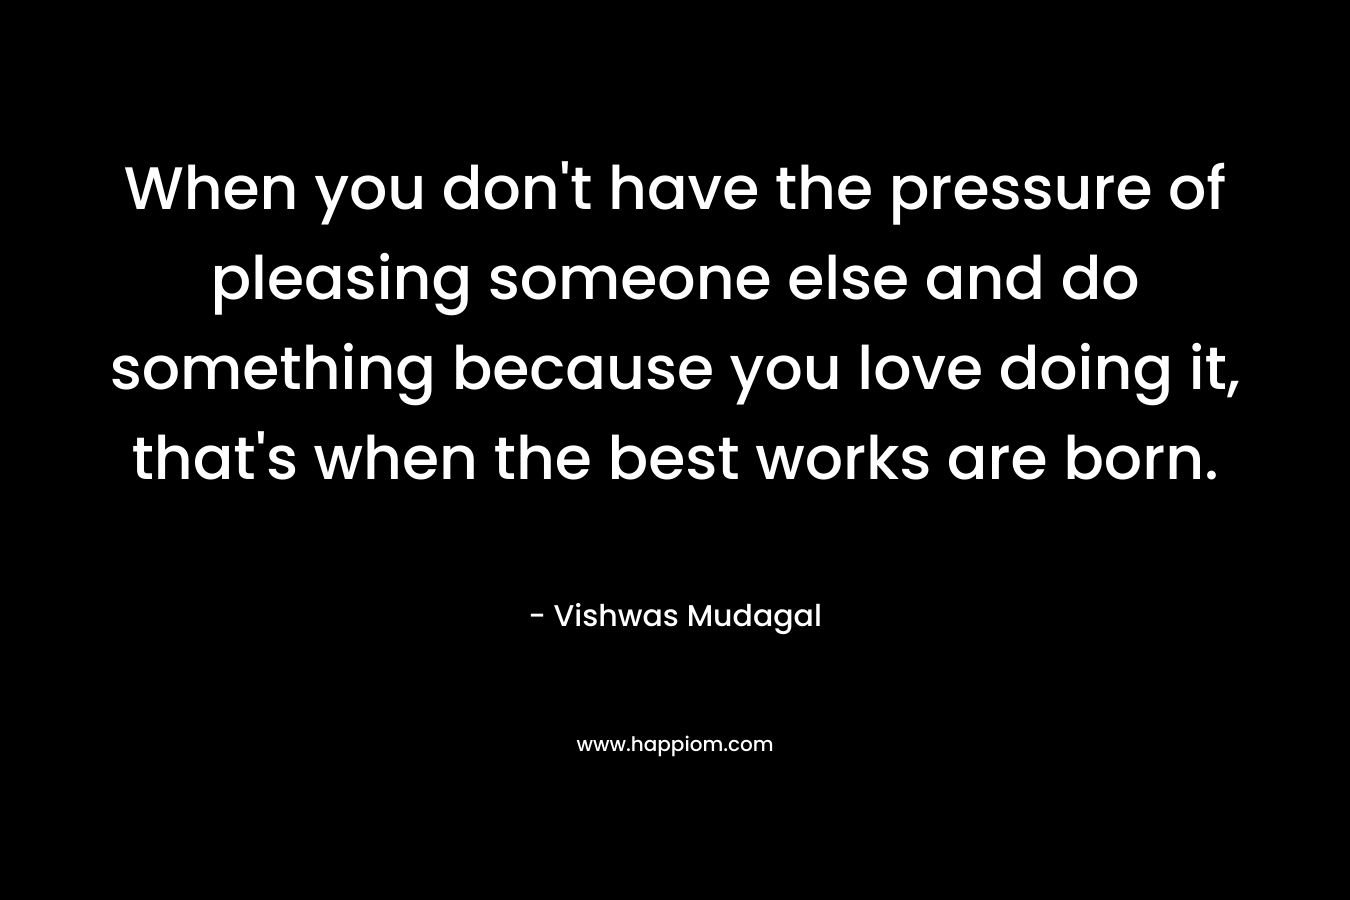 When you don't have the pressure of pleasing someone else and do something because you love doing it, that's when the best works are born.